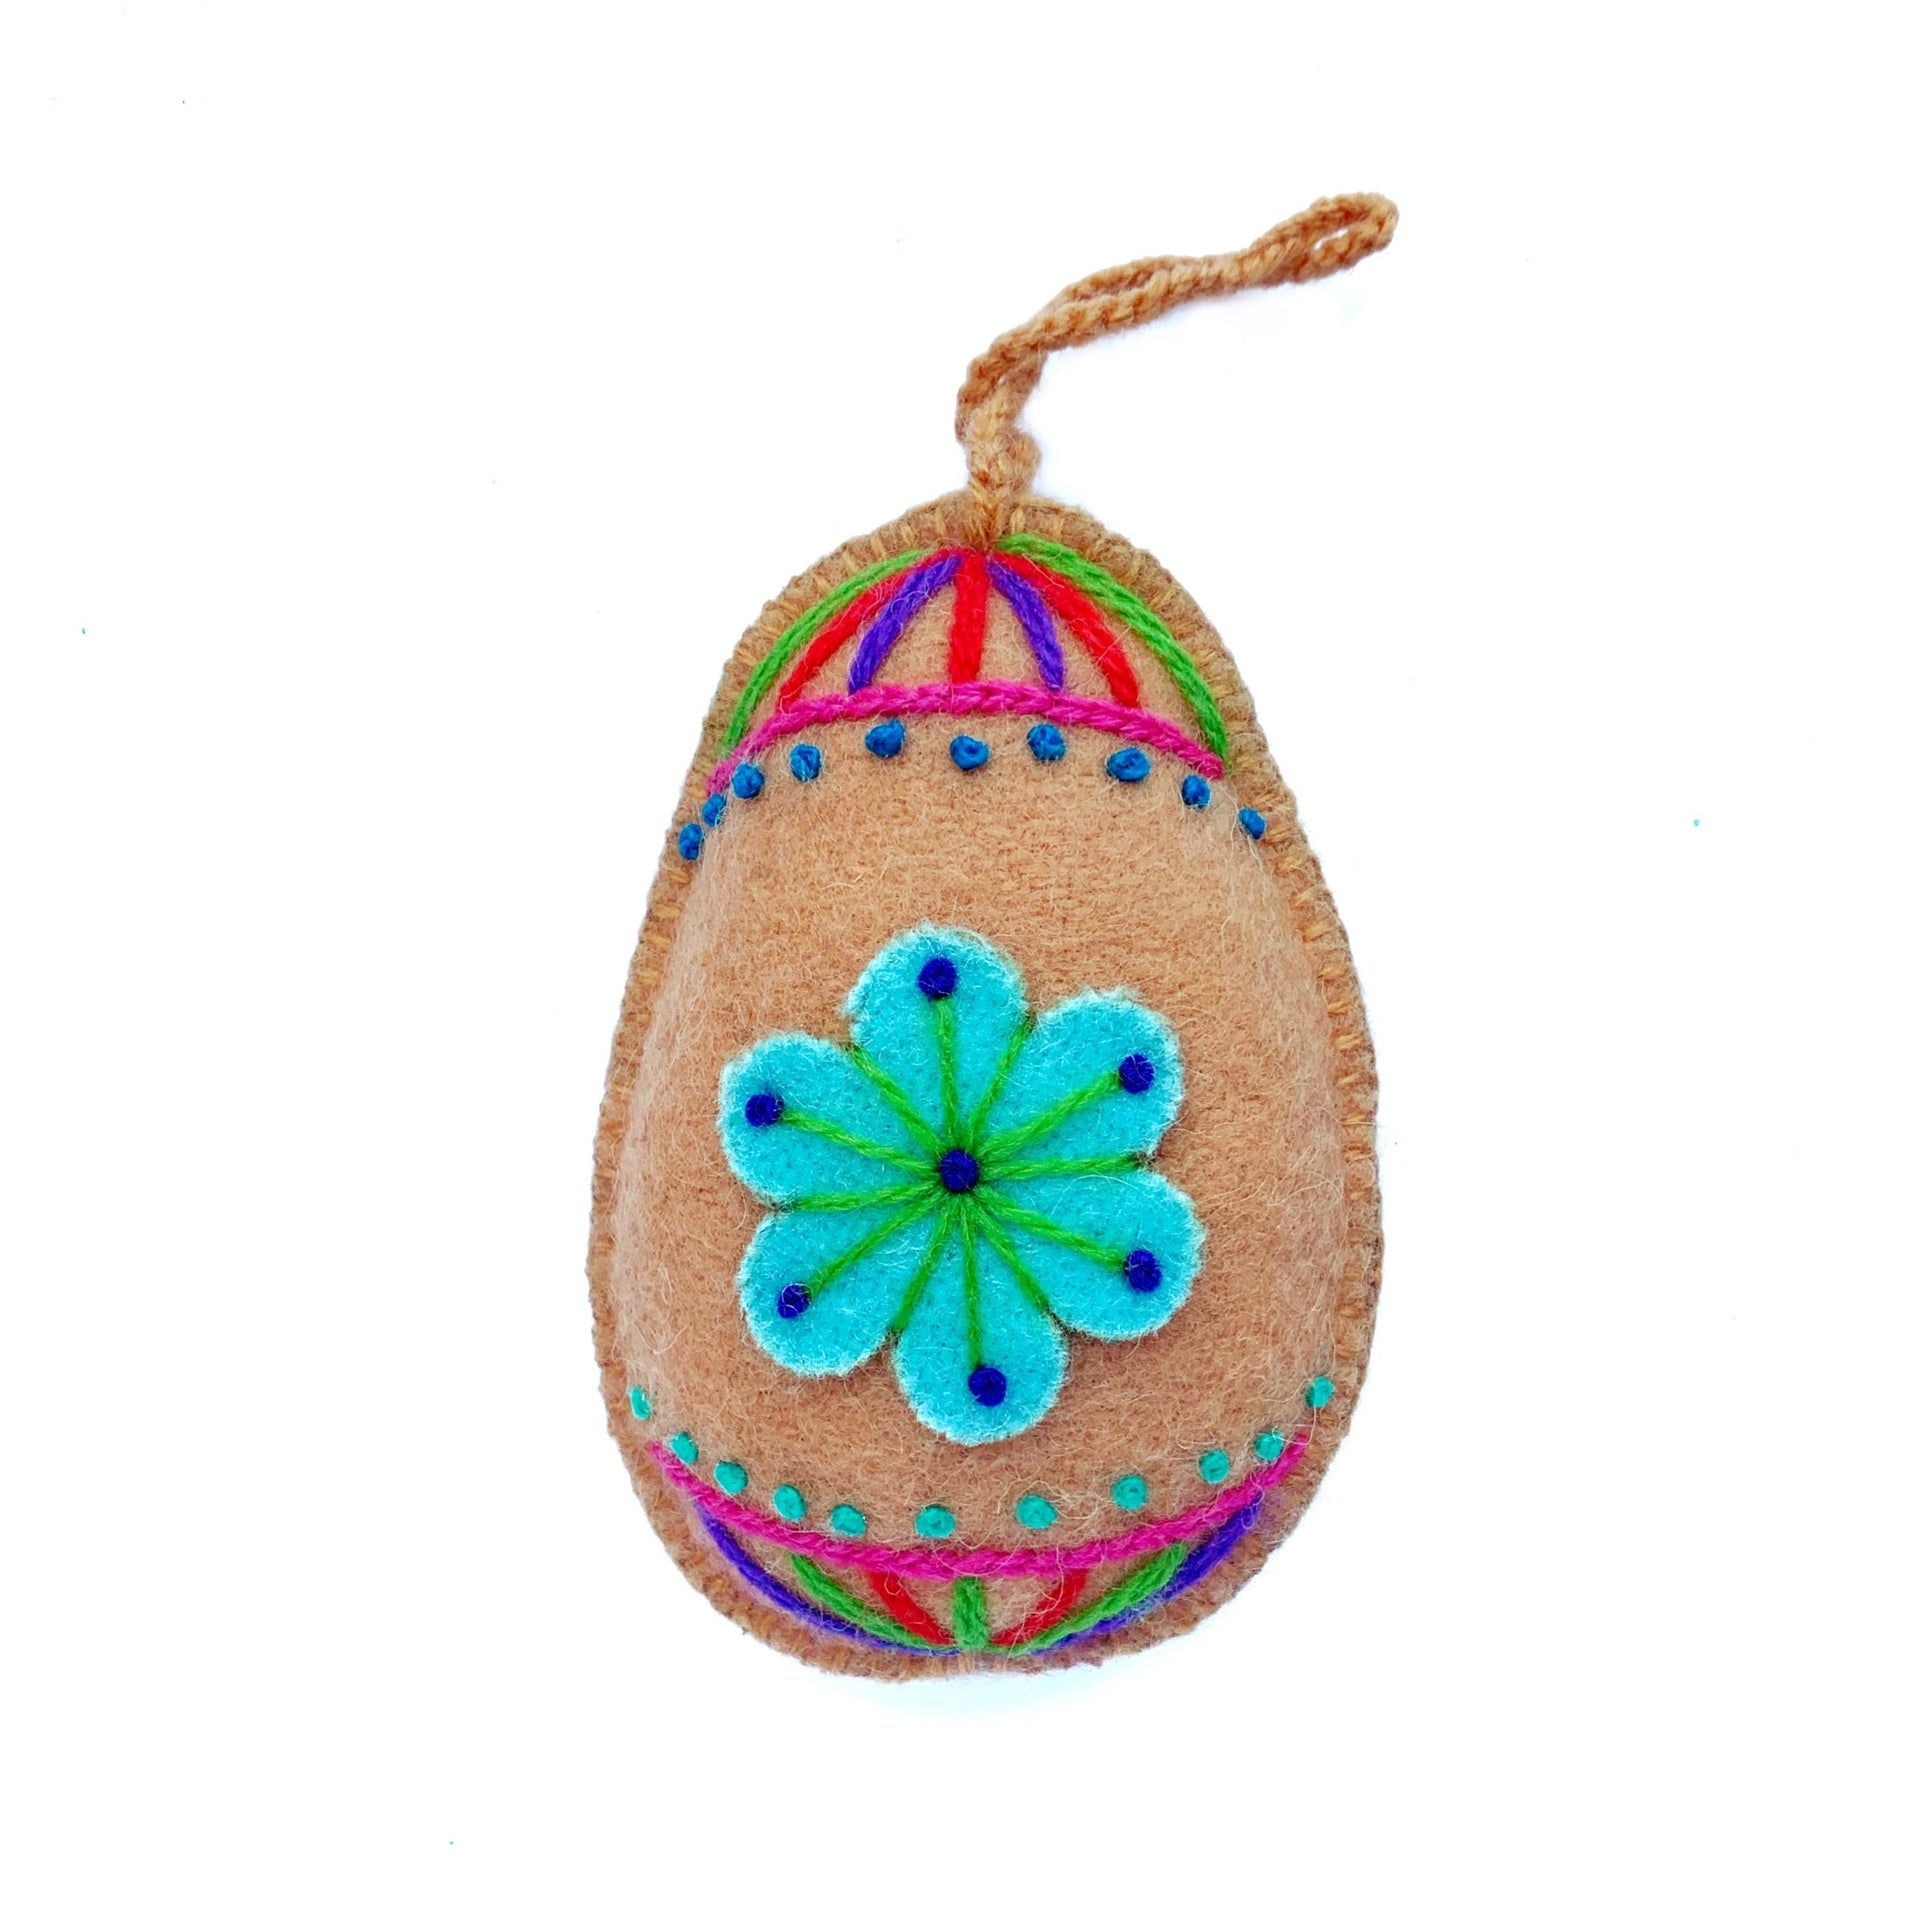 Soft orange pastel Easter egg ornament with hand embroidered flowers and designs.